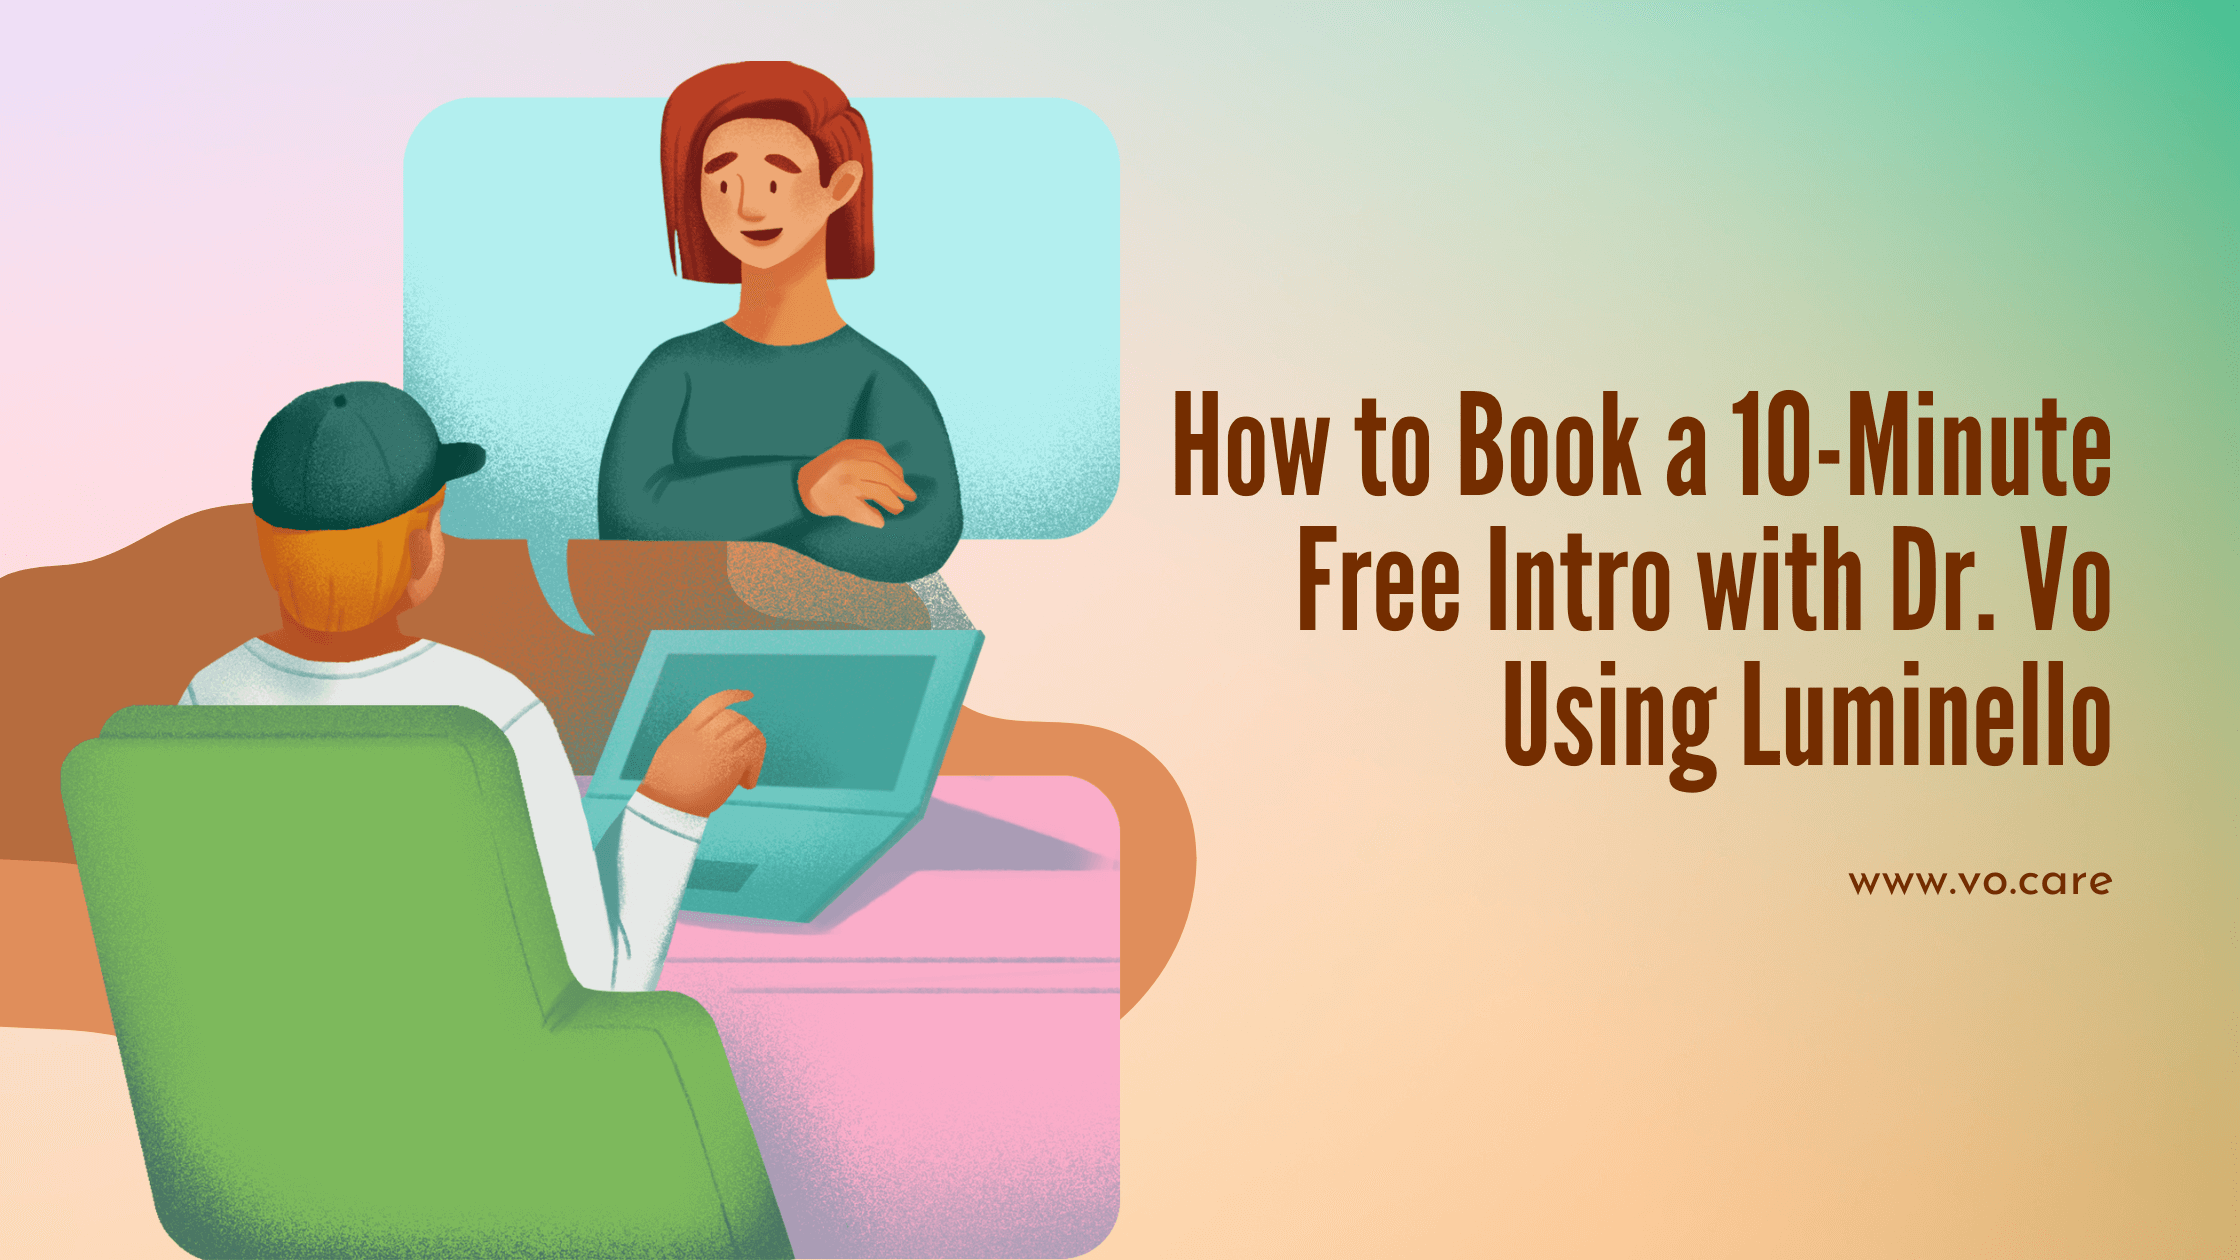 How to Book a 10-Minute Free Intro with Dr. Vo Using Luminello | Vo.Care